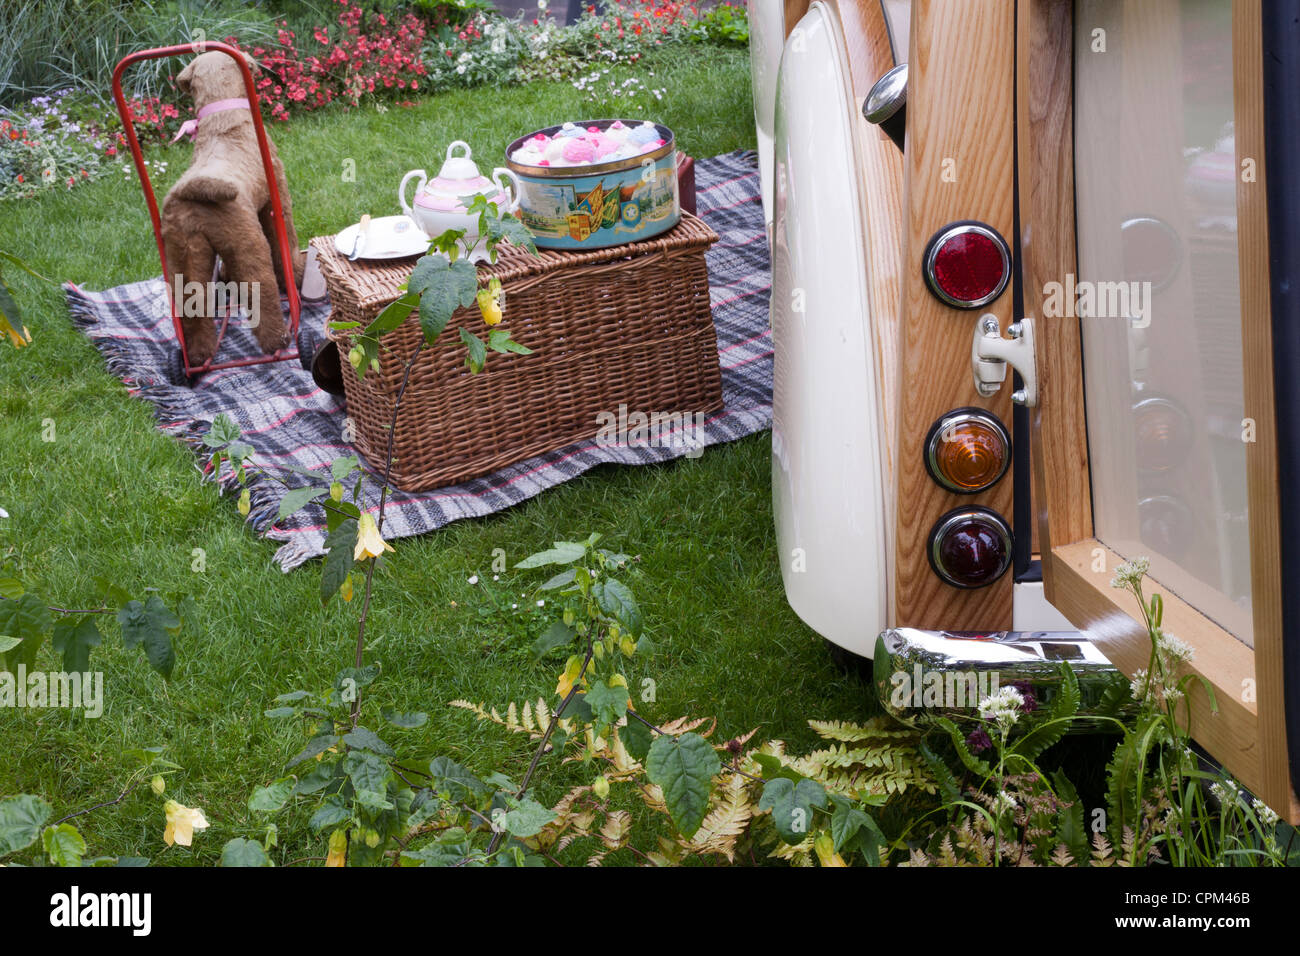 Picnic at RHS Chelsea Flower Show 2012. Stock Photo